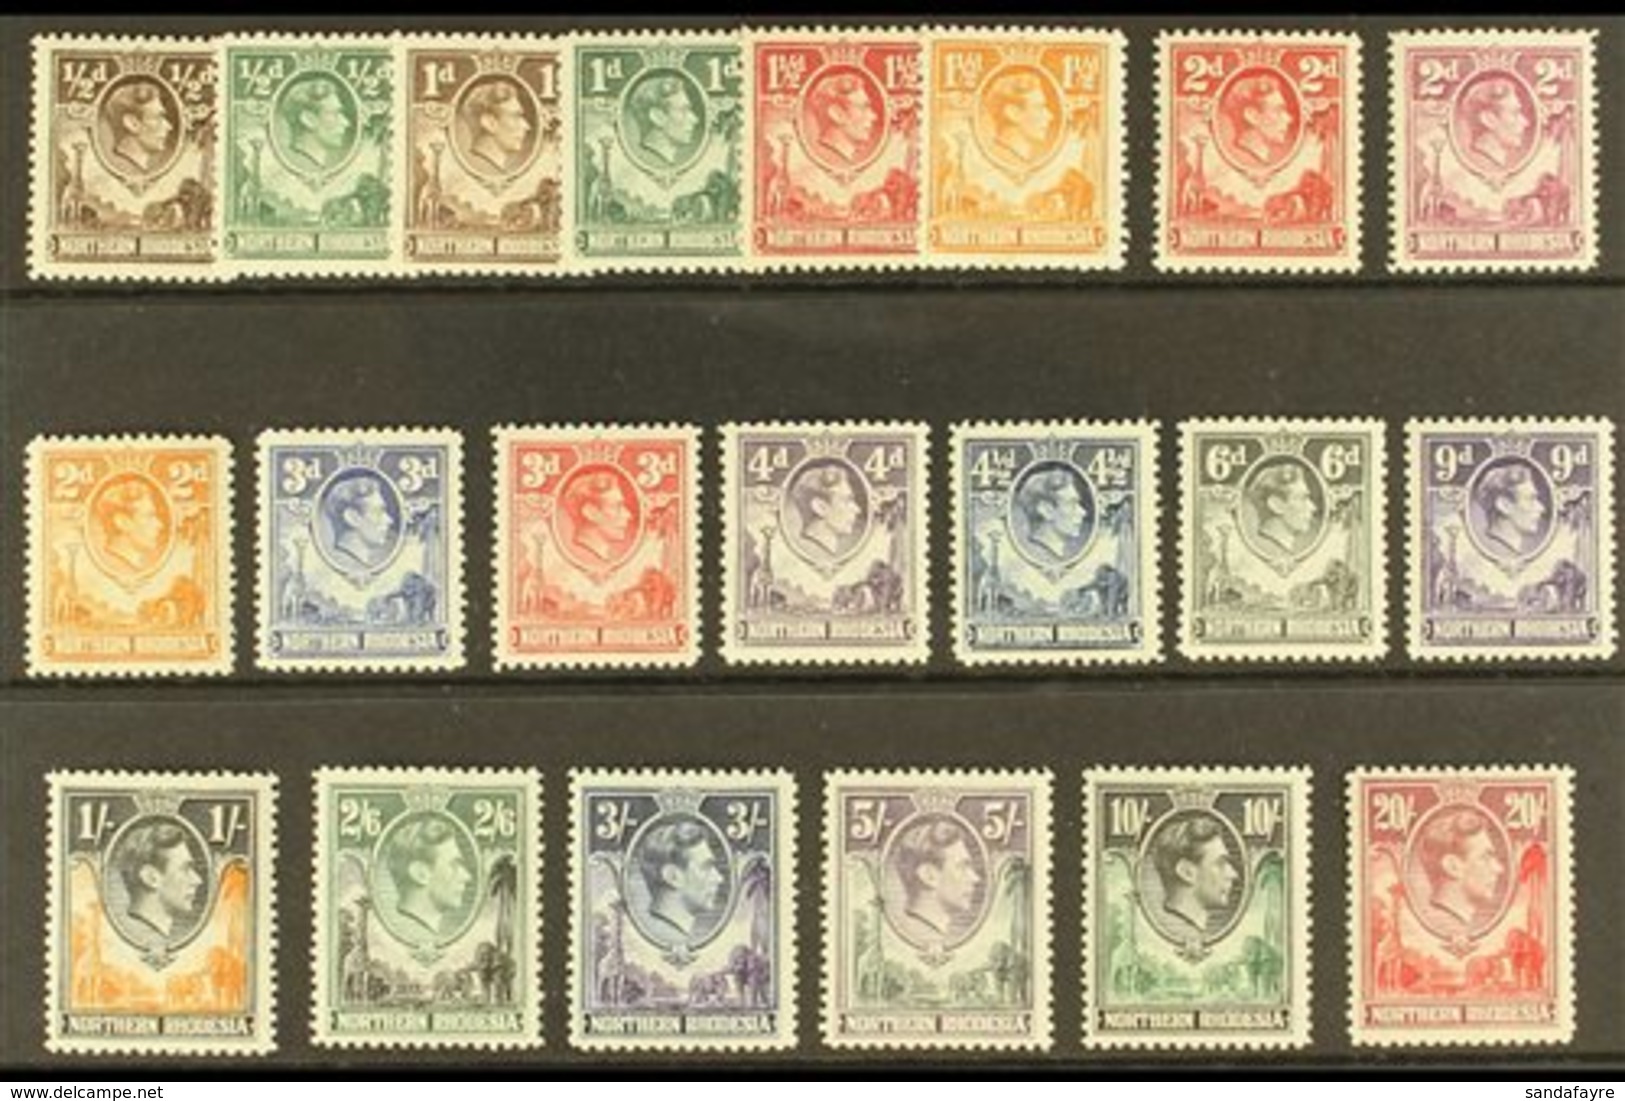 1938-52 Complete Definitive Set, SG 25/45, Fine Mint, All Stamps Except The 2d Yellow Brown Are NEVER HINGED MINT. (21 S - Rhodesia Del Nord (...-1963)